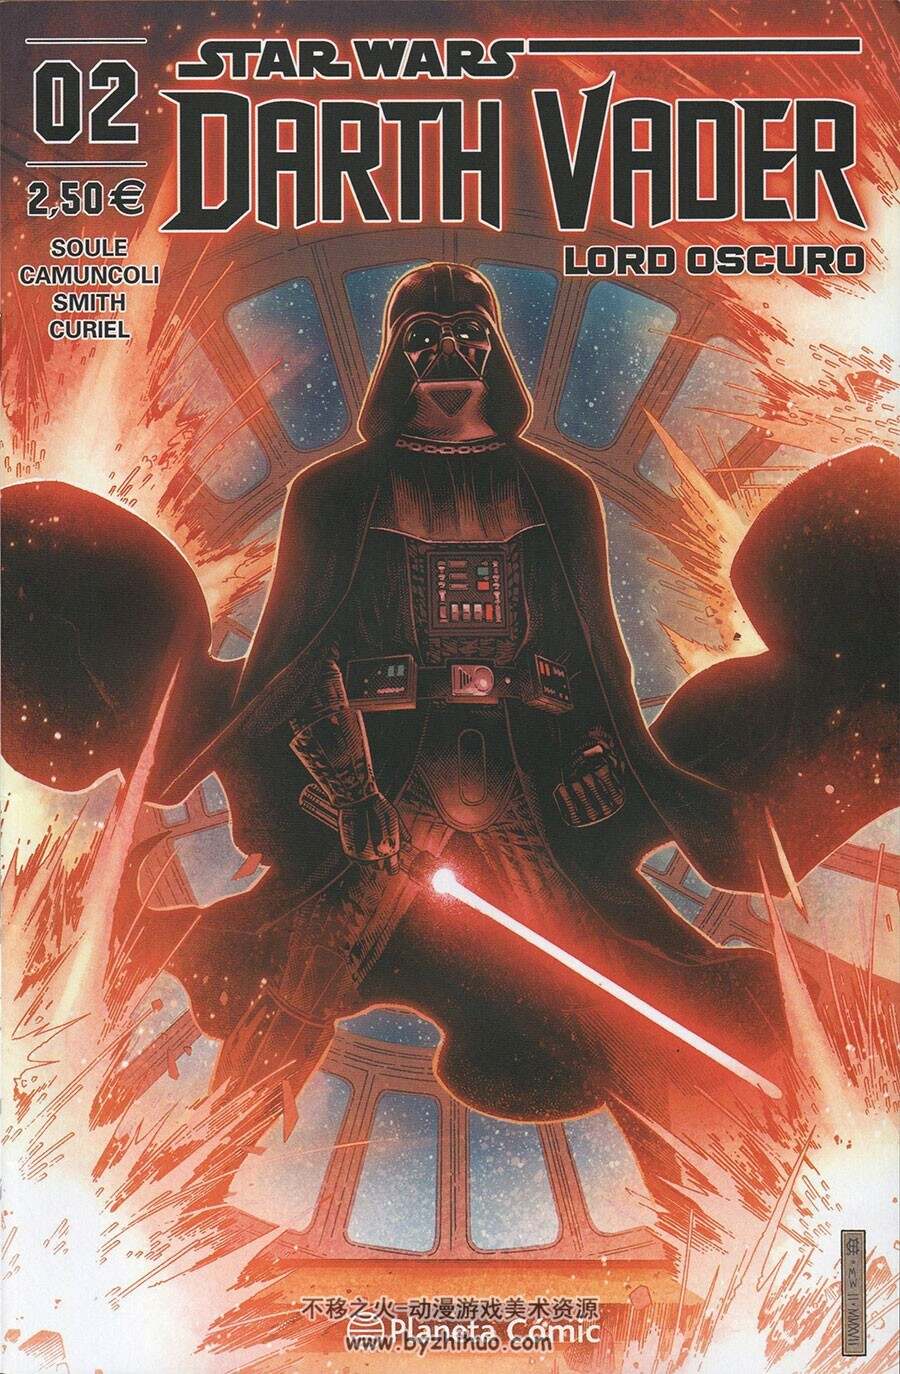 Star Wars Darth Vader Lord Oscuro 1-7册 Charles Soule 星球大战题材漫画